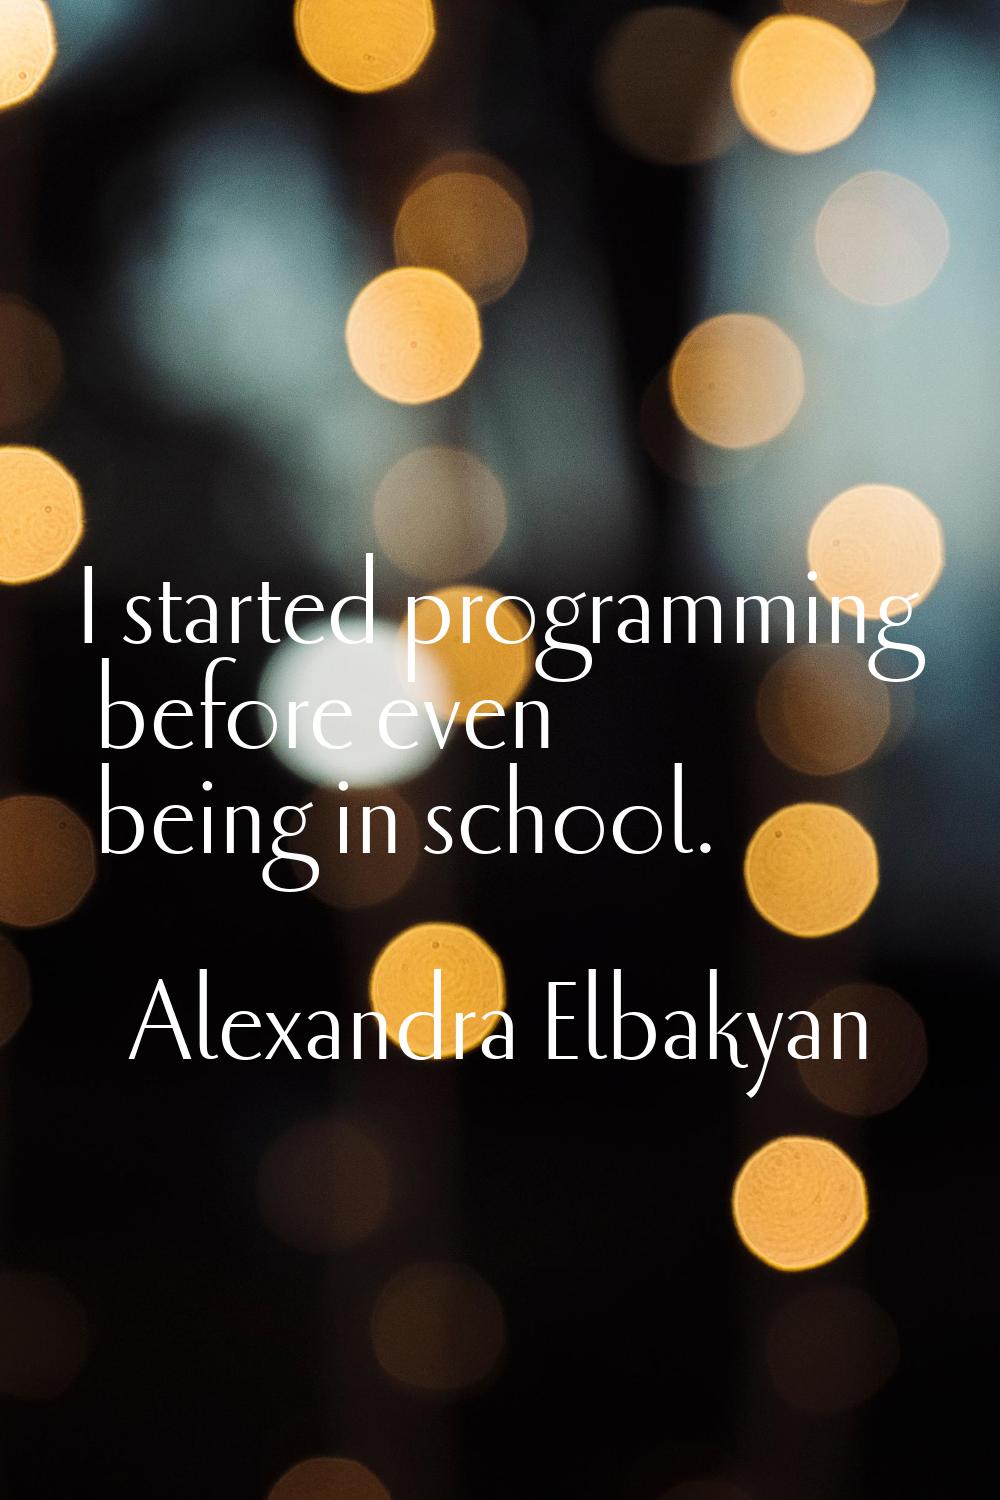 I started programming before even being in school.